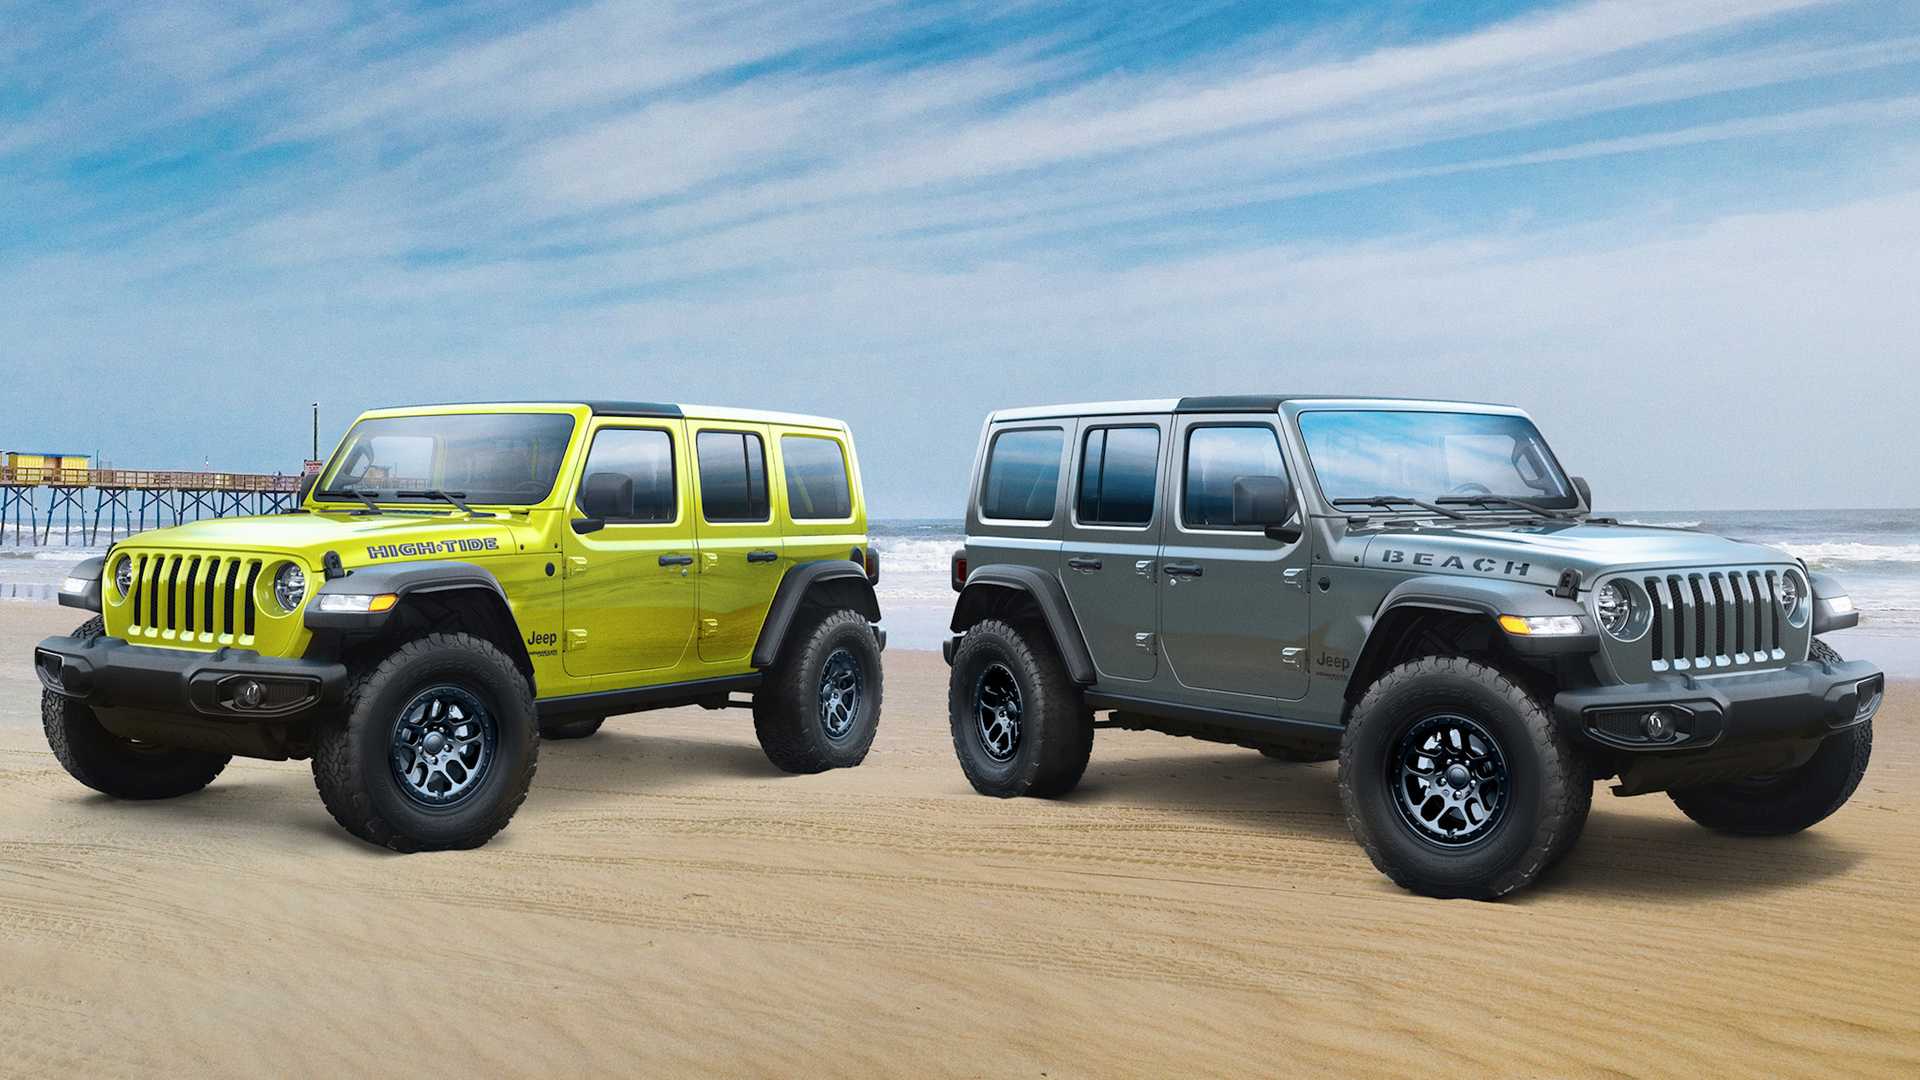 The 5 Jeep LED Lights Ready for Jeep Beach 2022